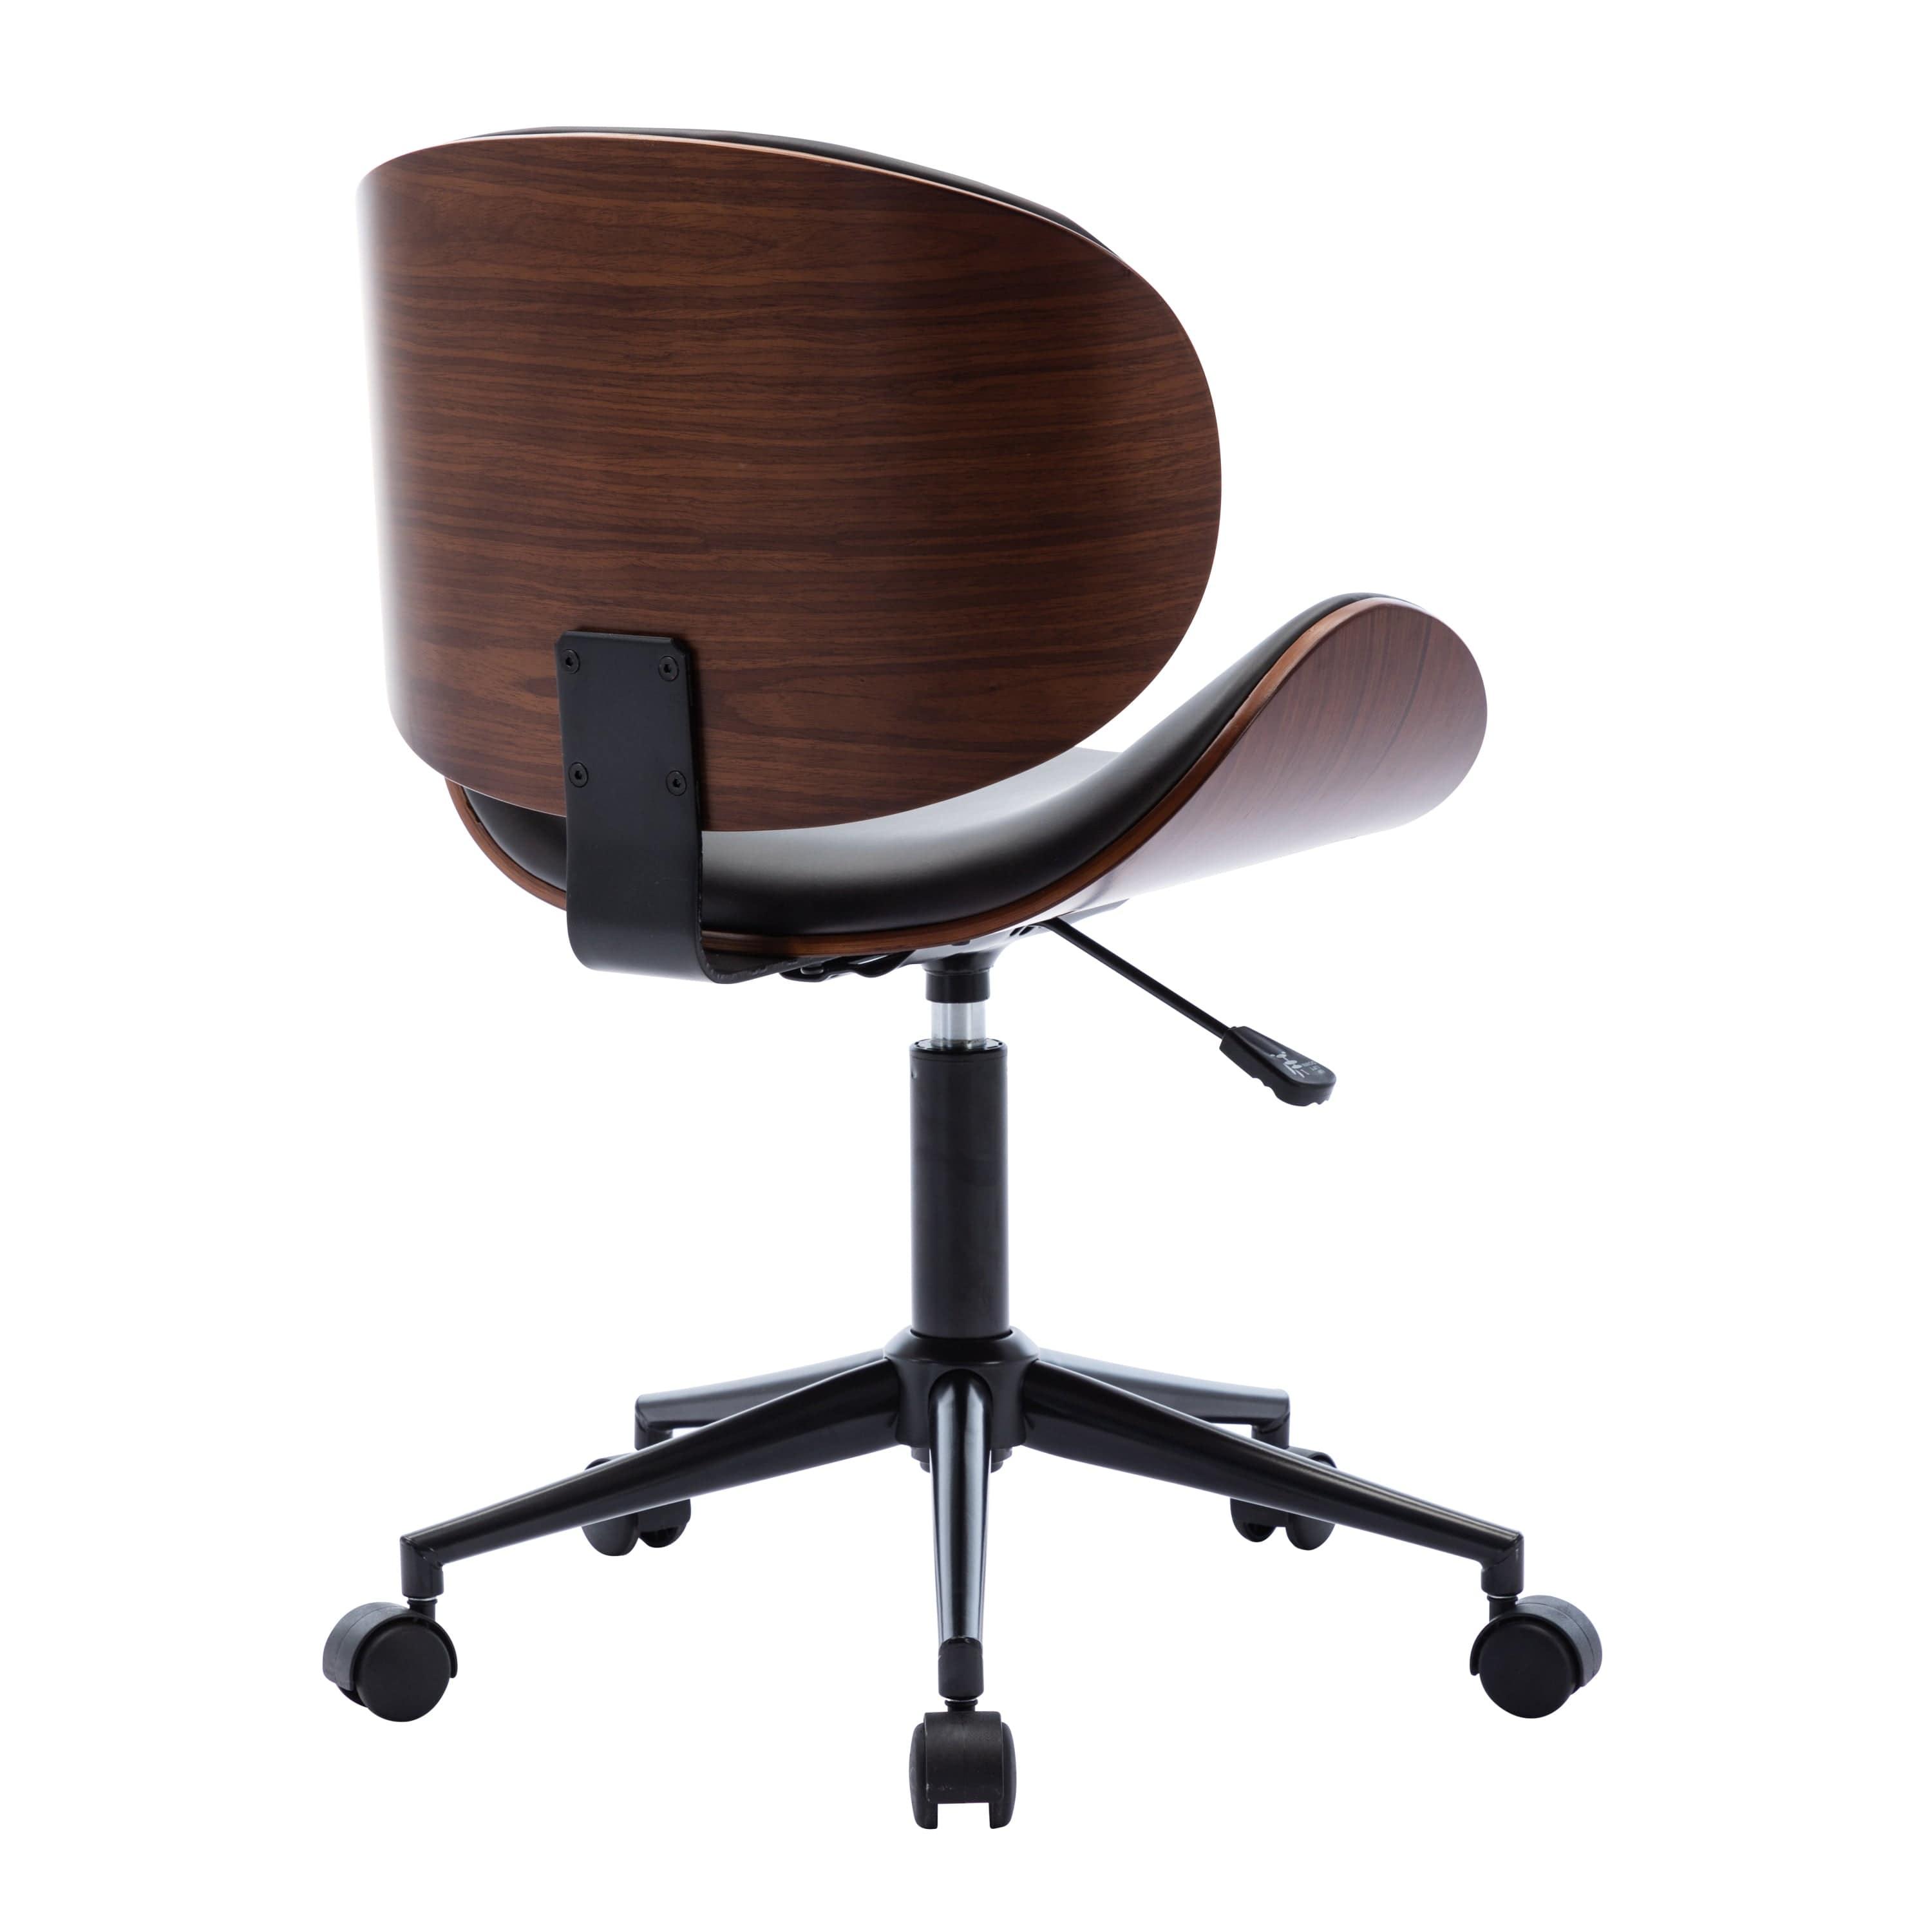 Shop HengMing Bentwood Adjustable Office Chair , Mix color PU Leather Upholstery and black foot Mademoiselle Home Decor